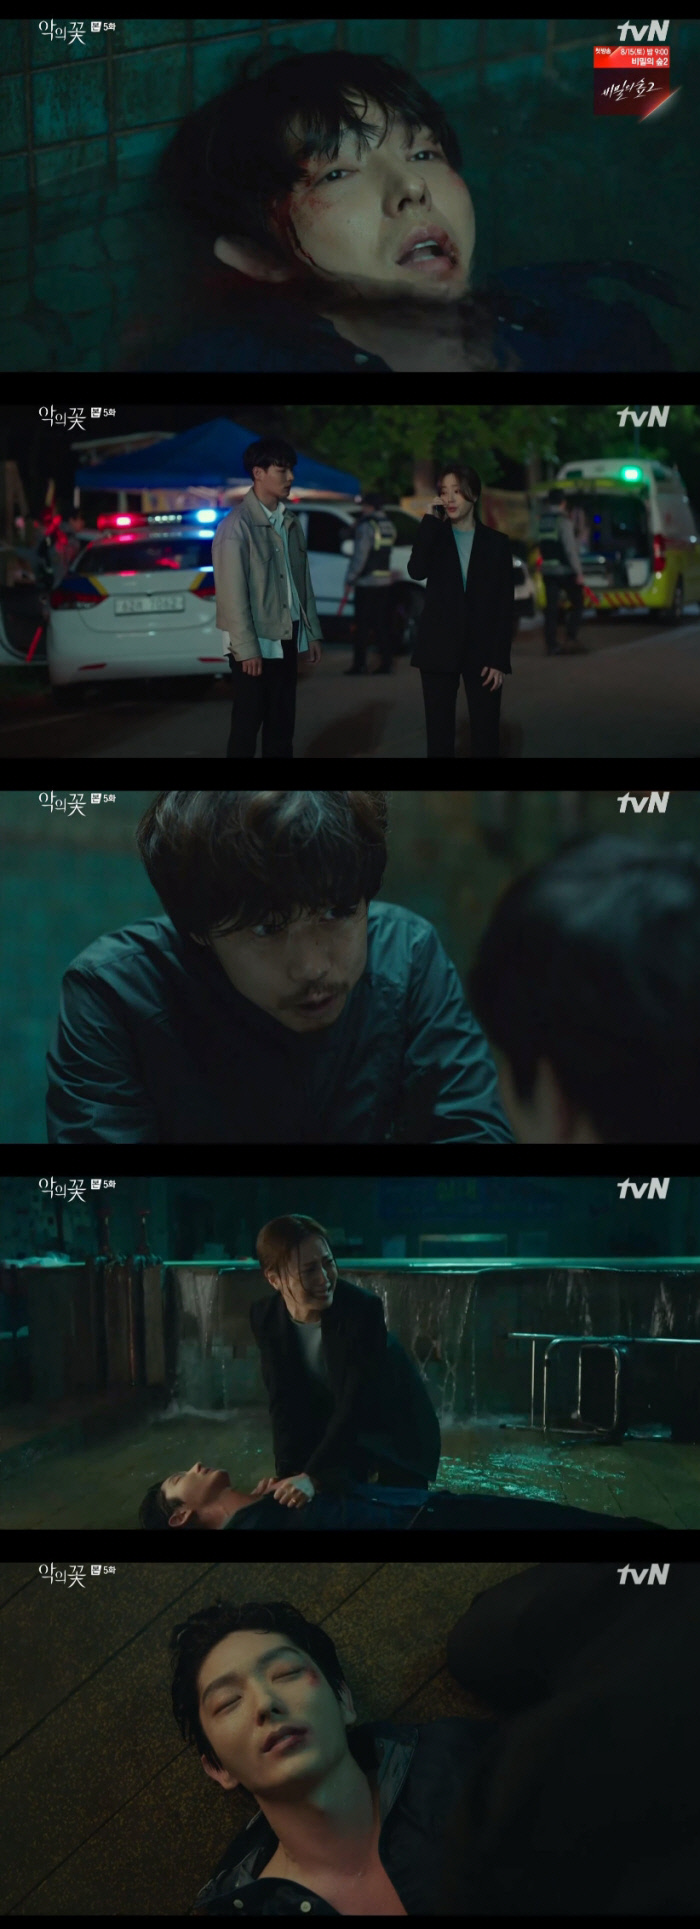 TVN Wednesday-Thursday Evening drama Flower of Evil once again peaked at the unique suspense melodrama.On this day, the broadcast gave suspense through urgent tracking and action from the beginning, and at the last moment, it was a sad melody and a strong room and attracted viewers properly.Cha JiWon (Moon Chae-won) had a struggle with a person who was presumed to be Do Hyun-soo (Lee Joon-gi), the son of Do Min-seok (Choi Byung-mo), who was involved in the serial murder in the performance, and was disturbed by the discovery of the watch of Baek Hee-Seong (Lee Joon-gi) at the scene.She was convinced that she had been kidnapped by the real killer Park Kyoungchun (Yoon Byeong-hee), and she managed to catch up with the breaking of the falling reason. She chased Park Kyoungchuns car and chased her crazy chase.Park Kyongchun, who abducted the police and kidnapped Baek Hee-seong, began questioning where his wifes body was buried.At this time, Baek Hee-seong asked even more about Park Kyoungchuns eyes looking at him, knowing that he was like those who said I am the same as my father and I was written on a devil toward him in the past.It was the moment when a painful trace of life branded the Son of a Serial Killer was leaked in a tense tension.Park Kyoungchun and Baek Hee-seong, who said that he had missed the opportunity to catch the murderer as his false testimony became a decisive alibi of the Dominseok 18 years ago, did not show any signs of narrowing the nerves between the two.At that time, Park Kyoungchun gave out the Golden Carp Cellphone Loop, which caused a stir because it was a gift given to him by his sister Do Hae-soo (Im Na-young/Jang Hee-jin).However, Park Kyoungchun was increasingly surrounded by Baek Hee-Seong, who was confused about how he got it as his wifes relic.Cha JiWon, who found them in a desperate investigation, jumped without hesitation when he saw a submerged Baek Hee-seong.Cha JiWon, who struggles to untie the rope tied to the floor, made the viewers breathe.Baek Hee-seong, who opened his eyes faintly in the water, recalled the past by looking at such Cha JiWon.Cha JiWon, who had a pure eye that said, I will like you a lot in the future, disappeared from his fathers specter that he was killing when he was with her.To Baek Hee-seong, who learned this, Cha JiWon was absolutely necessary, and his kiss meant the Choices.But now, as he was getting unconscious, he had a feeling of regrets.I closed my eyes with a monologue saying, You should not have met me and I am ... sorry for you behind her crying to save her.The deep reverberation of the ending has added to the sound of the music video that deals with Cha JiWons feelings that have loved Baek Hee-seong.Also, there is a growing question about the next story about how the fate of Baek Hee-seong and Cha JiWon will change, suggesting the crossroads of Choices between doubt and faith that will be faced in the future.On the other hand, the 6th episode of TVN Wednesday-Thursday evening drama Flower of Evil, which is a high-density emotional tracing of two people facing the truth that they want to ignore, and the wife Cha JiWon who started to doubt his reality,